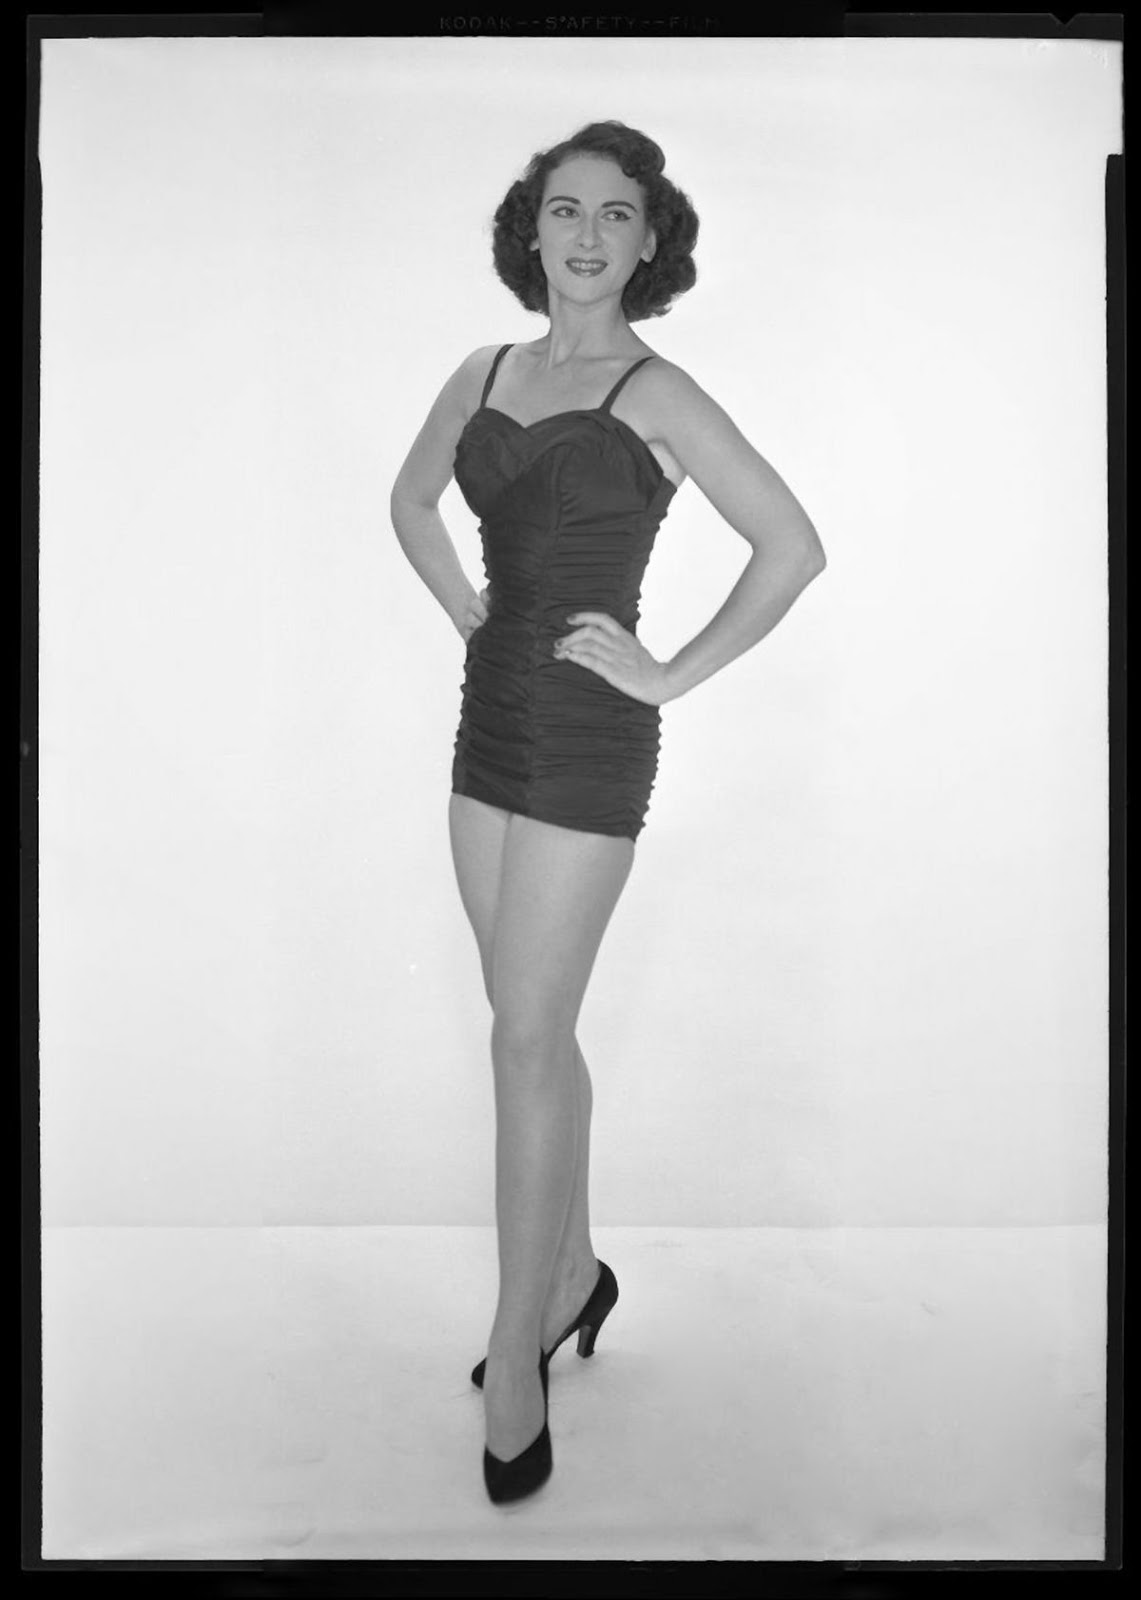 19 Fascinating Vintage Studio Photos of Women in Their Super Sexy '50s ...